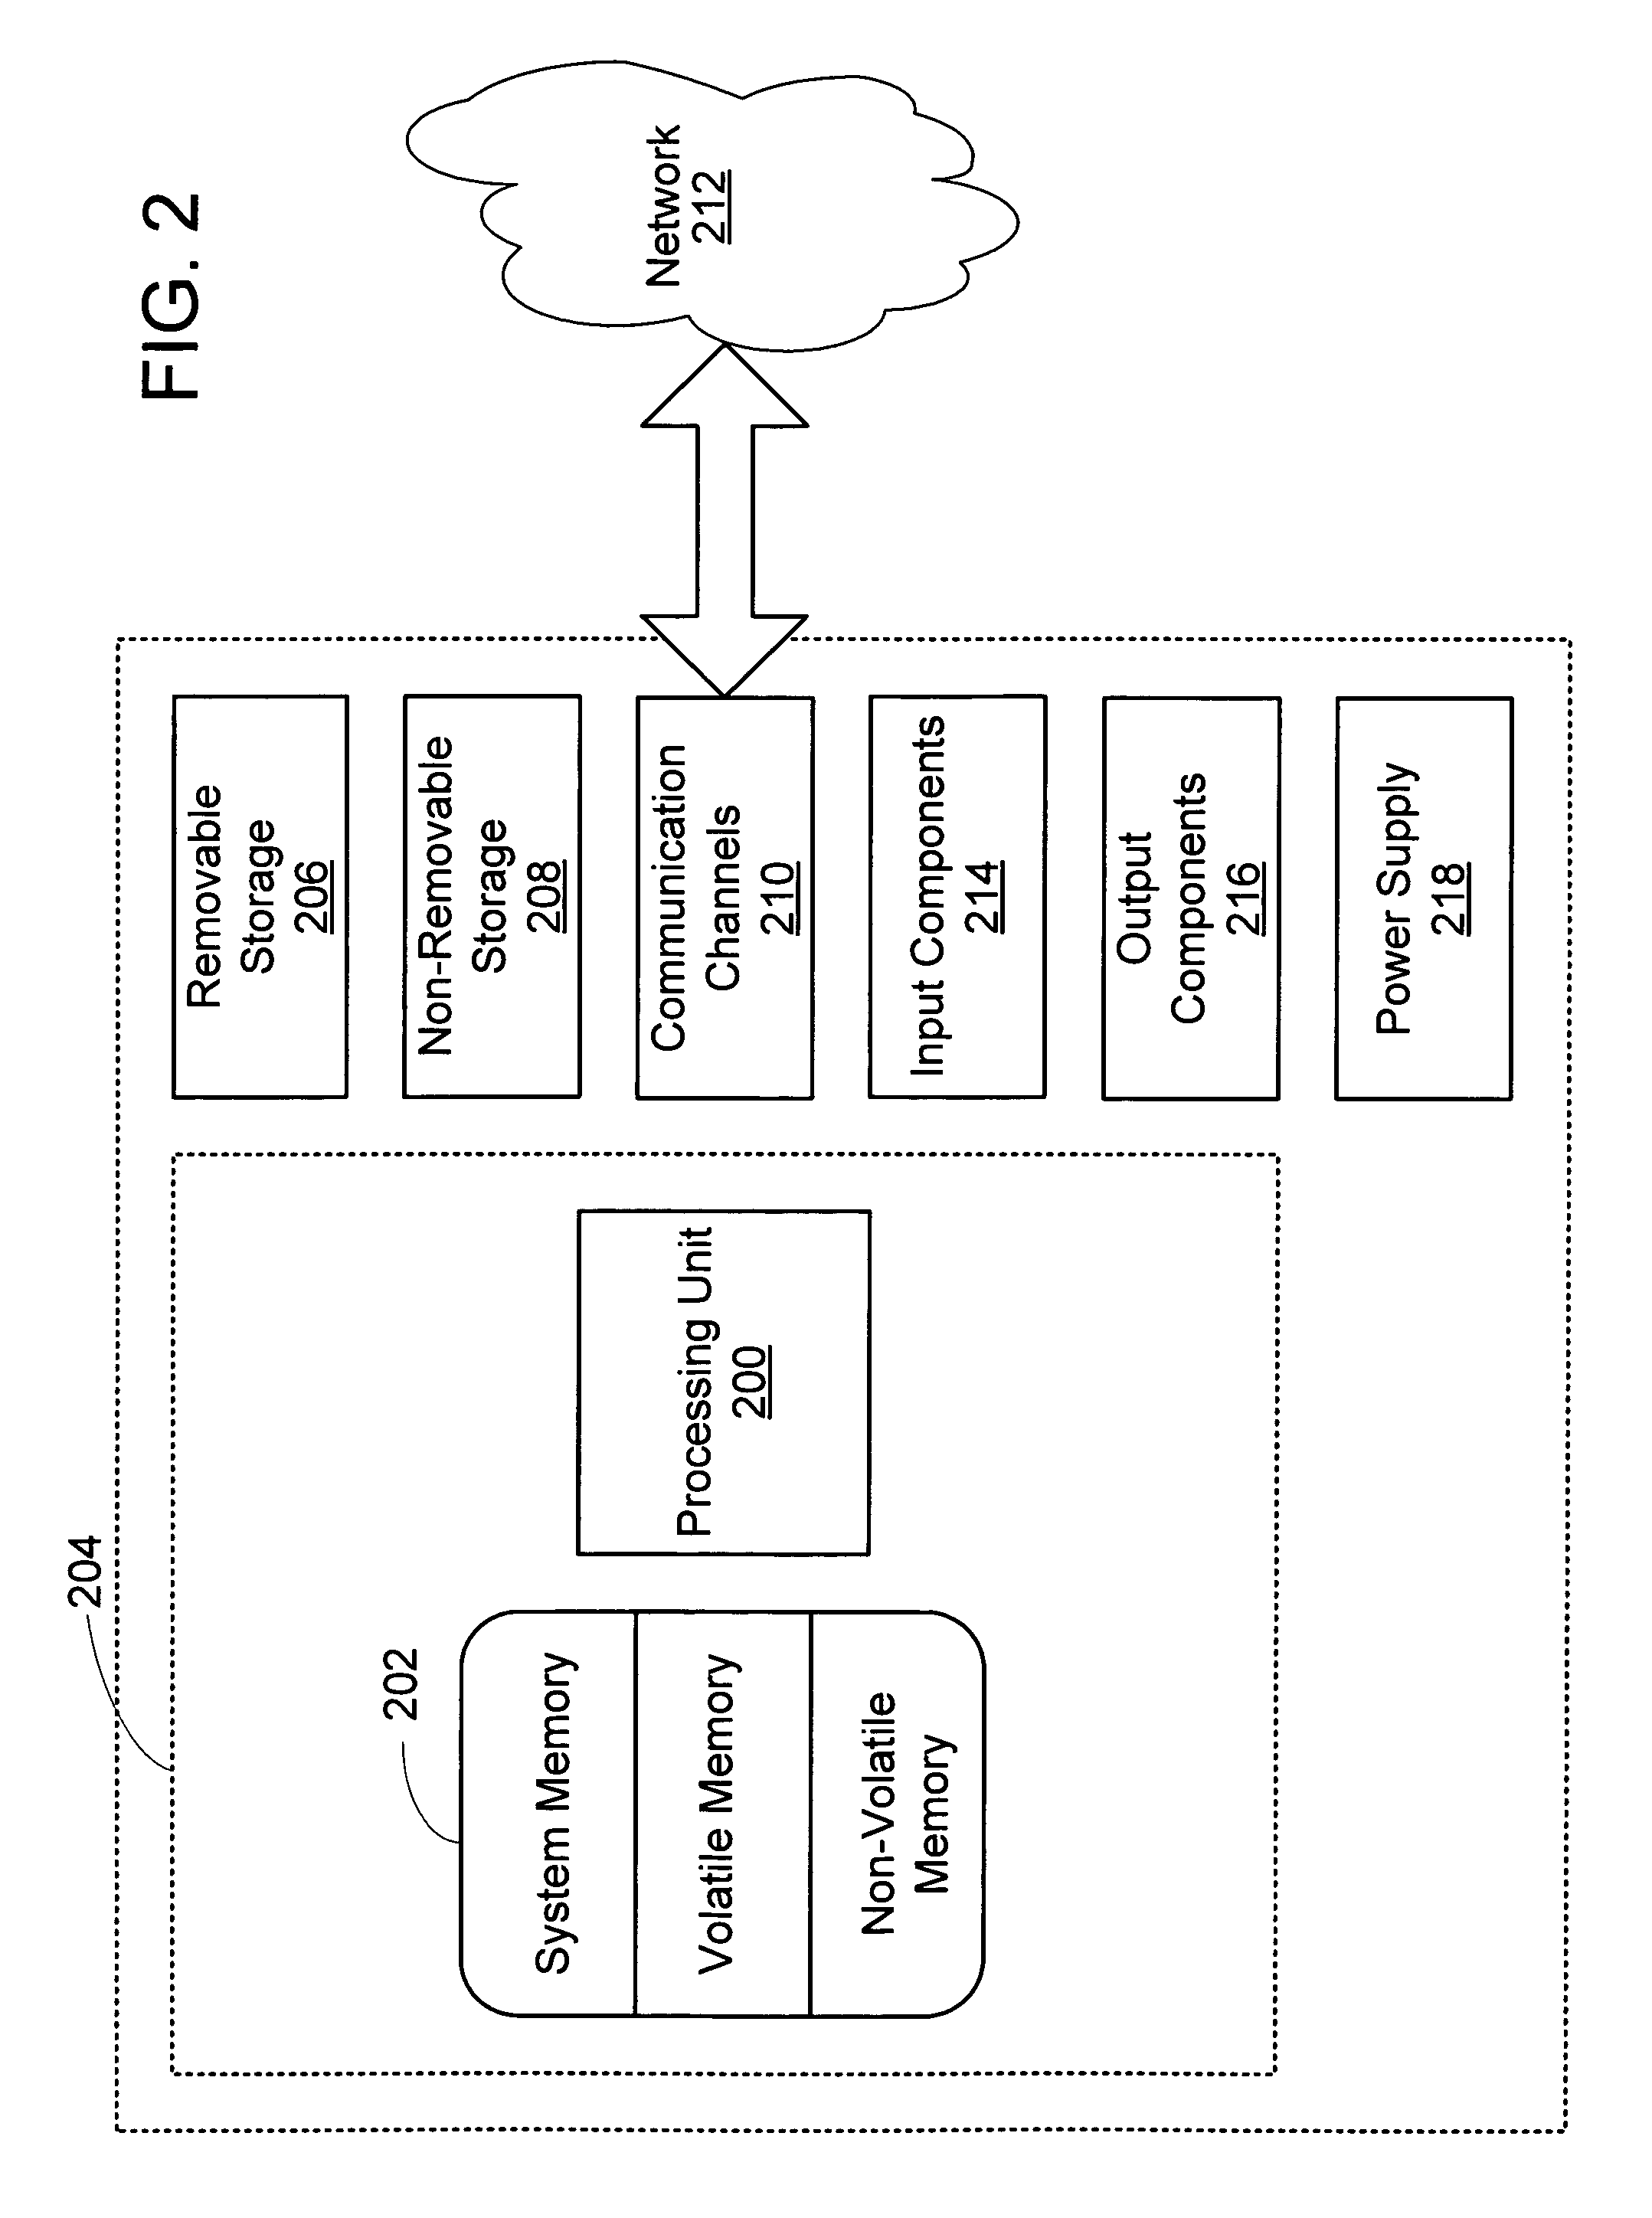 Method and system for structured DMA transactions